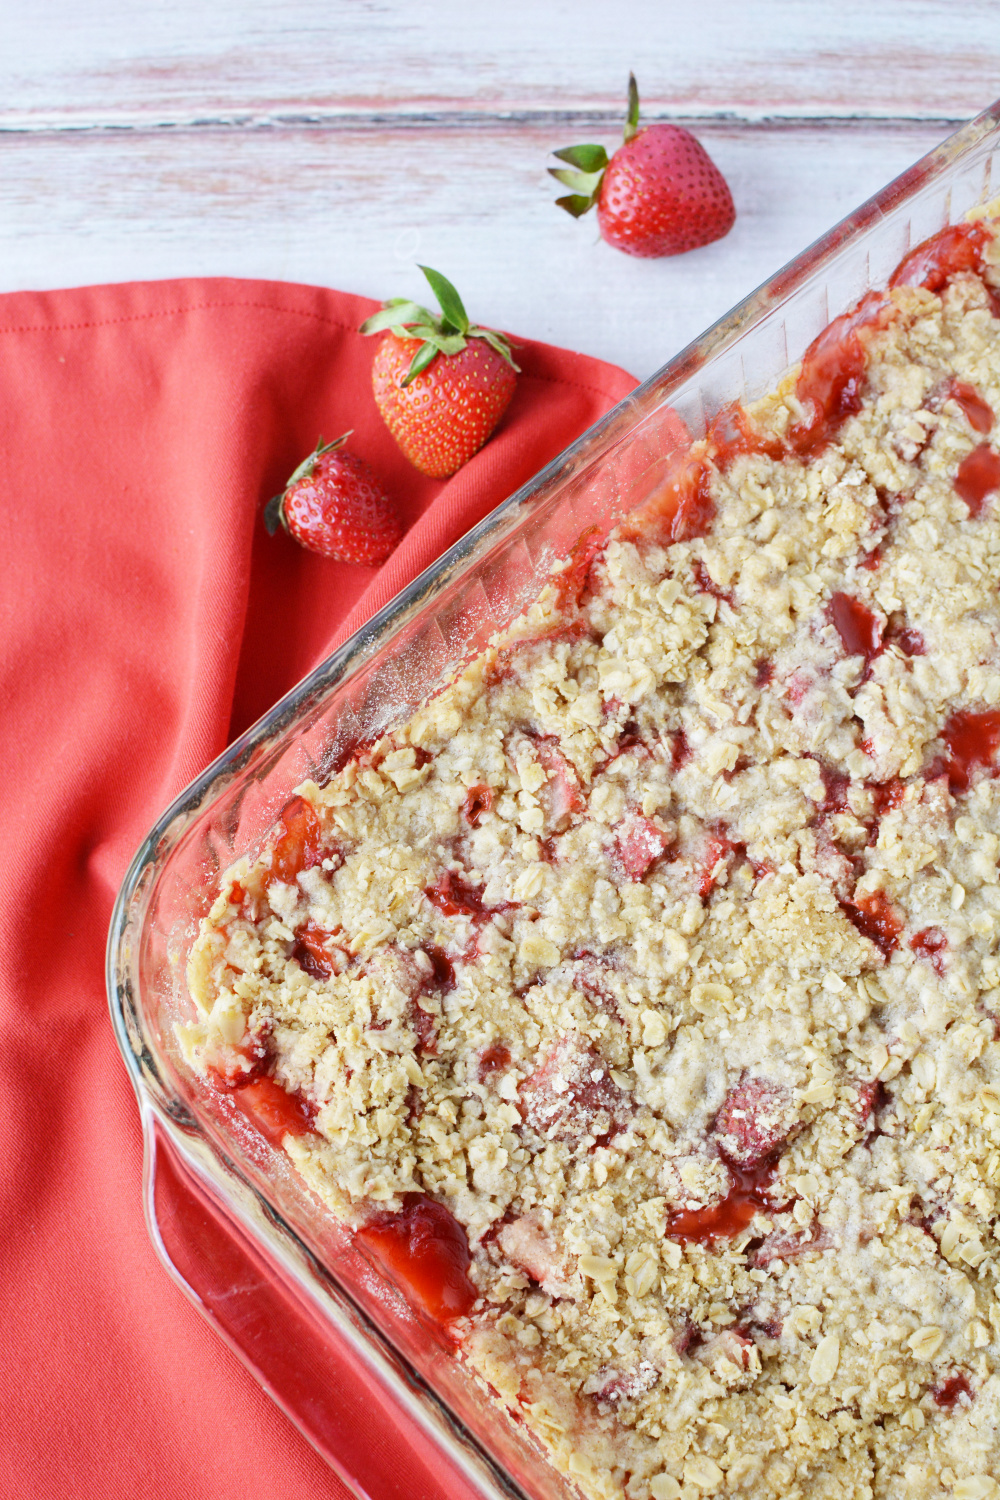 Strawberry Crumble Recipe with a streusel topping